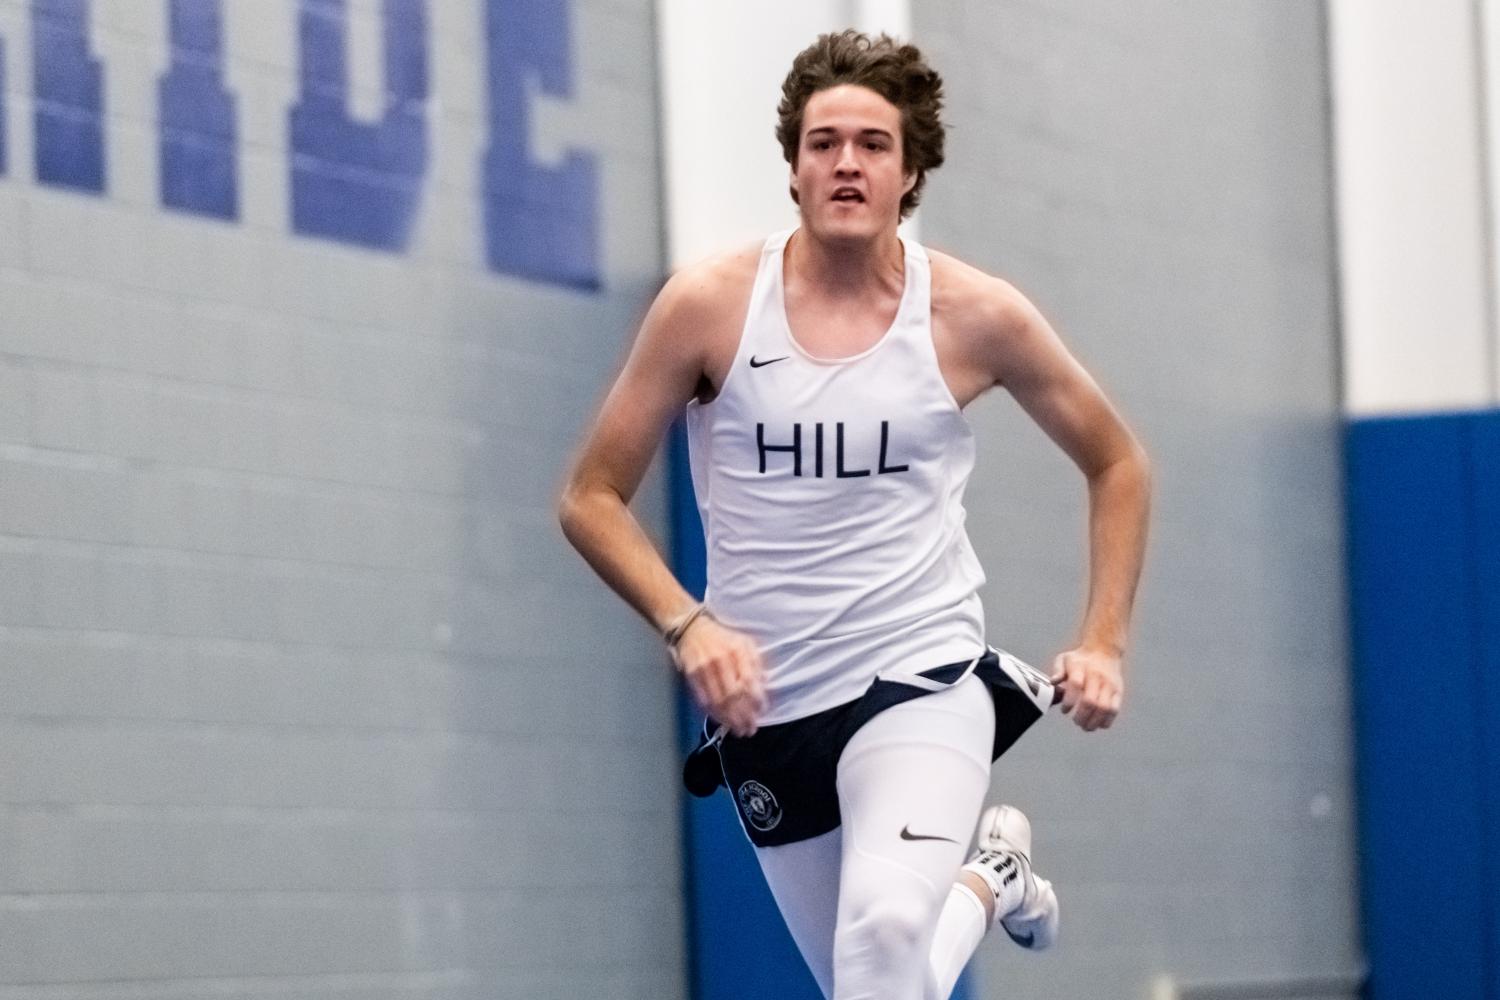 New to the sport: Sixth Formers who found a new passion at Hill